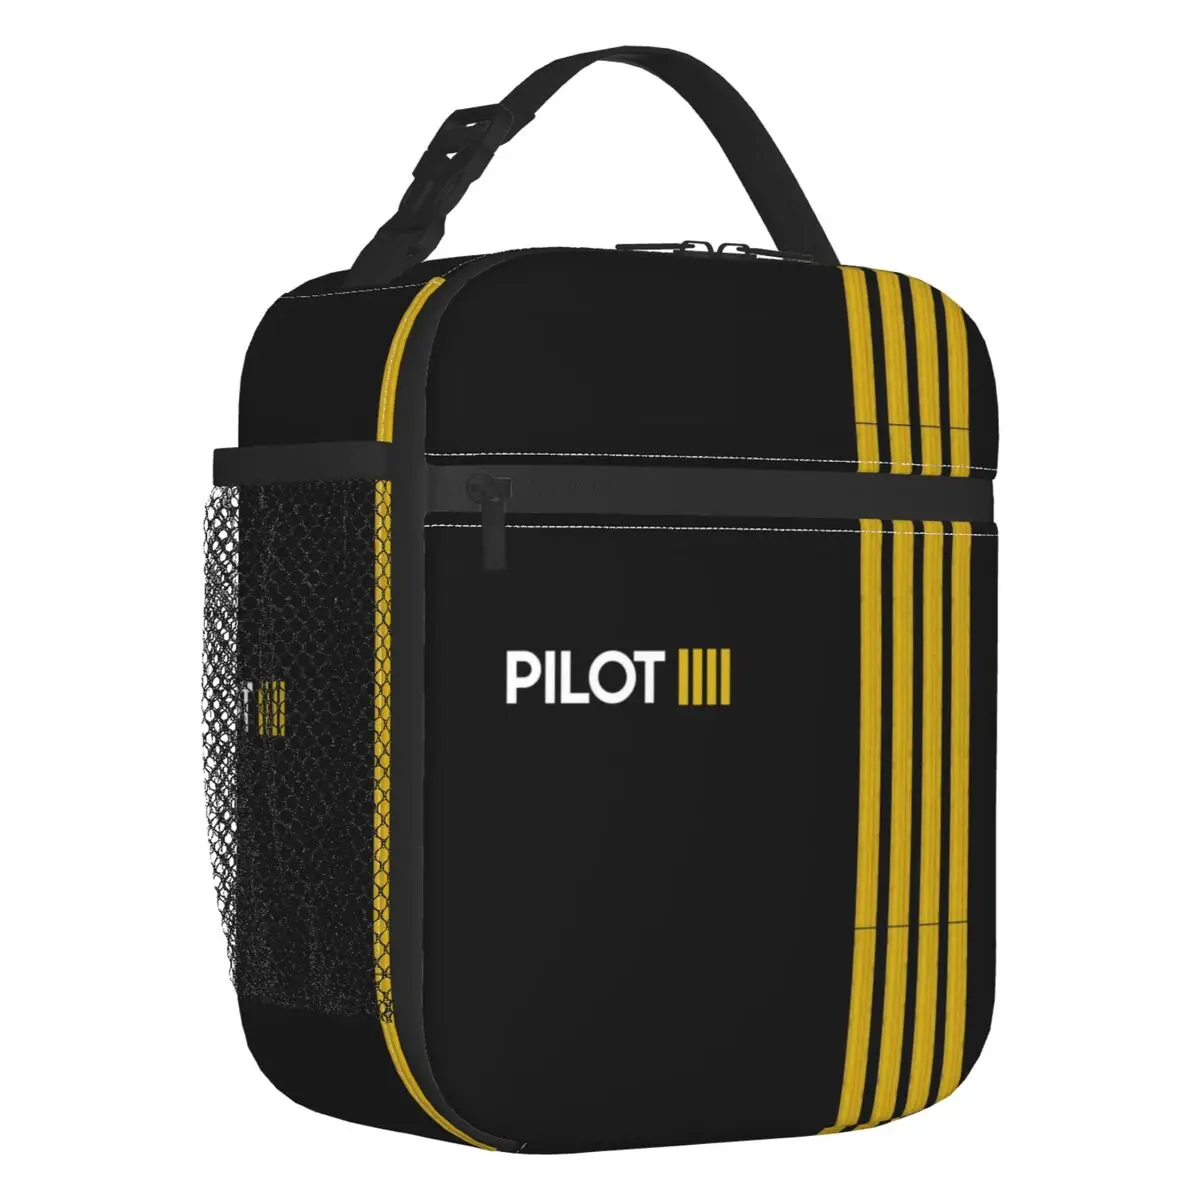 Pilot Captain Stripes Resuable Lunch Boxes Women Aviation Airplane Aviator Thermal Cooler Food Insulated Lunch Bag Kids School